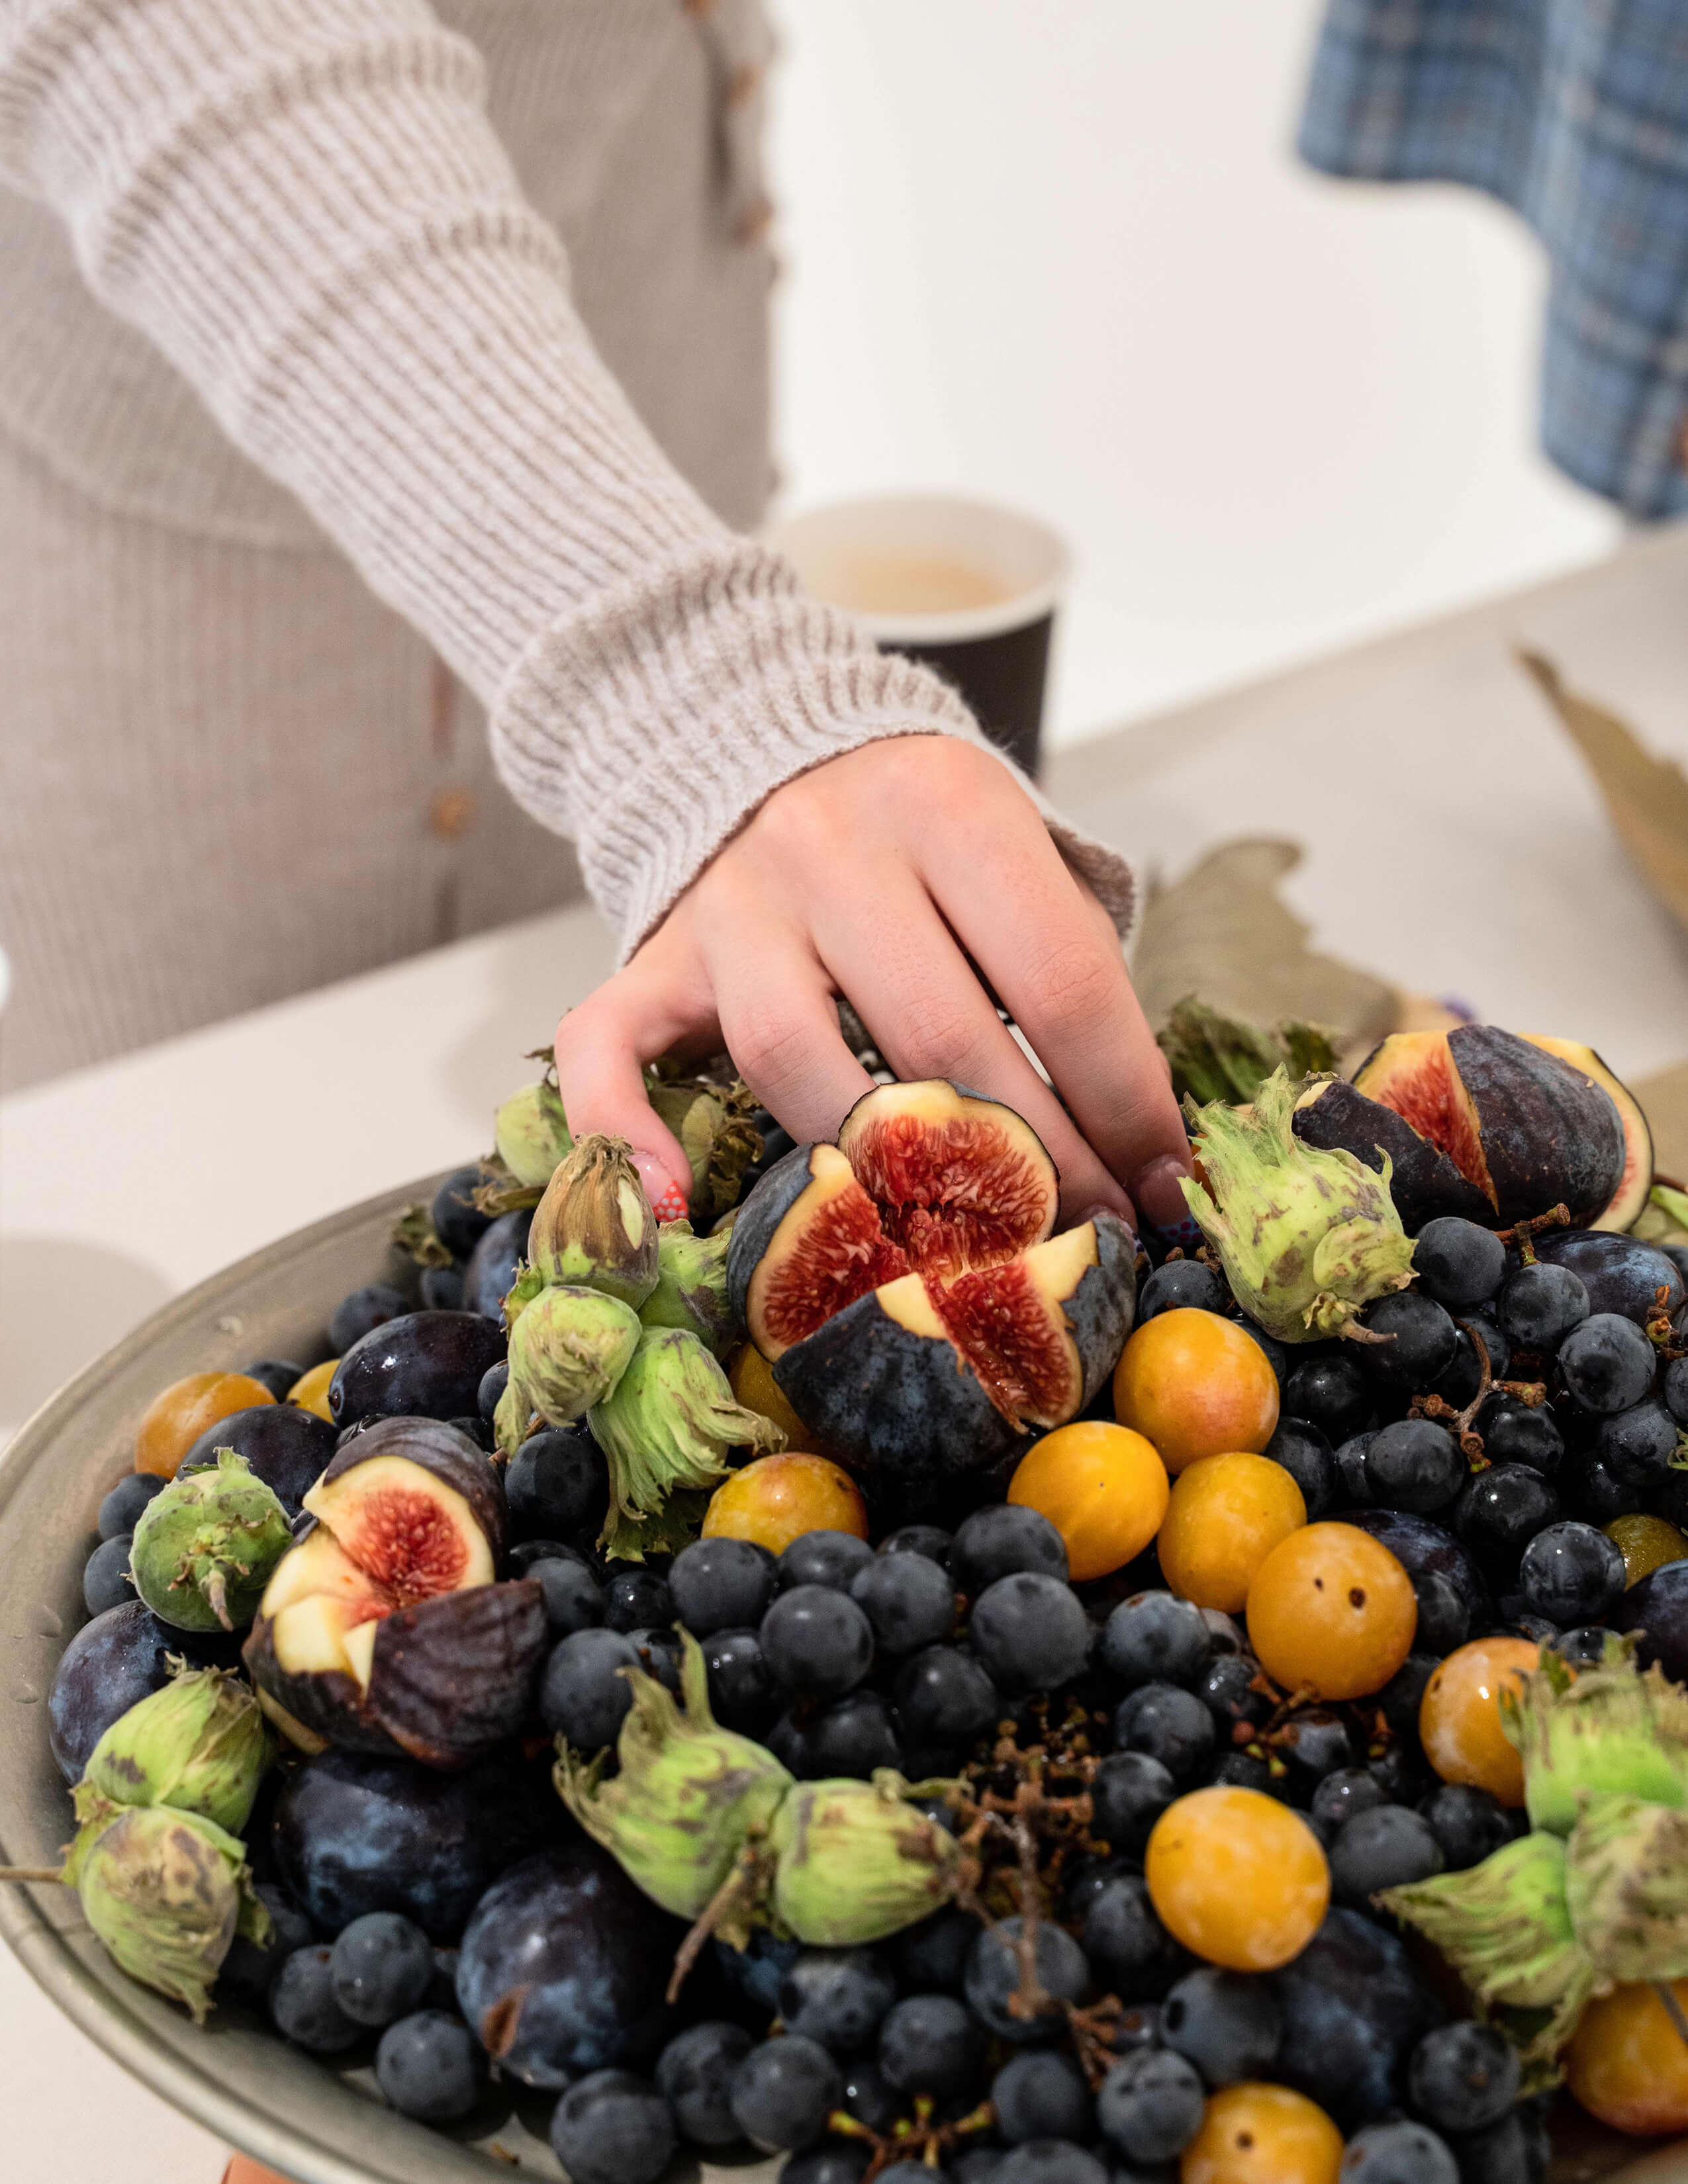 A hand on a plate of fruits filled with blueberries, grapes, figs and flower buds.